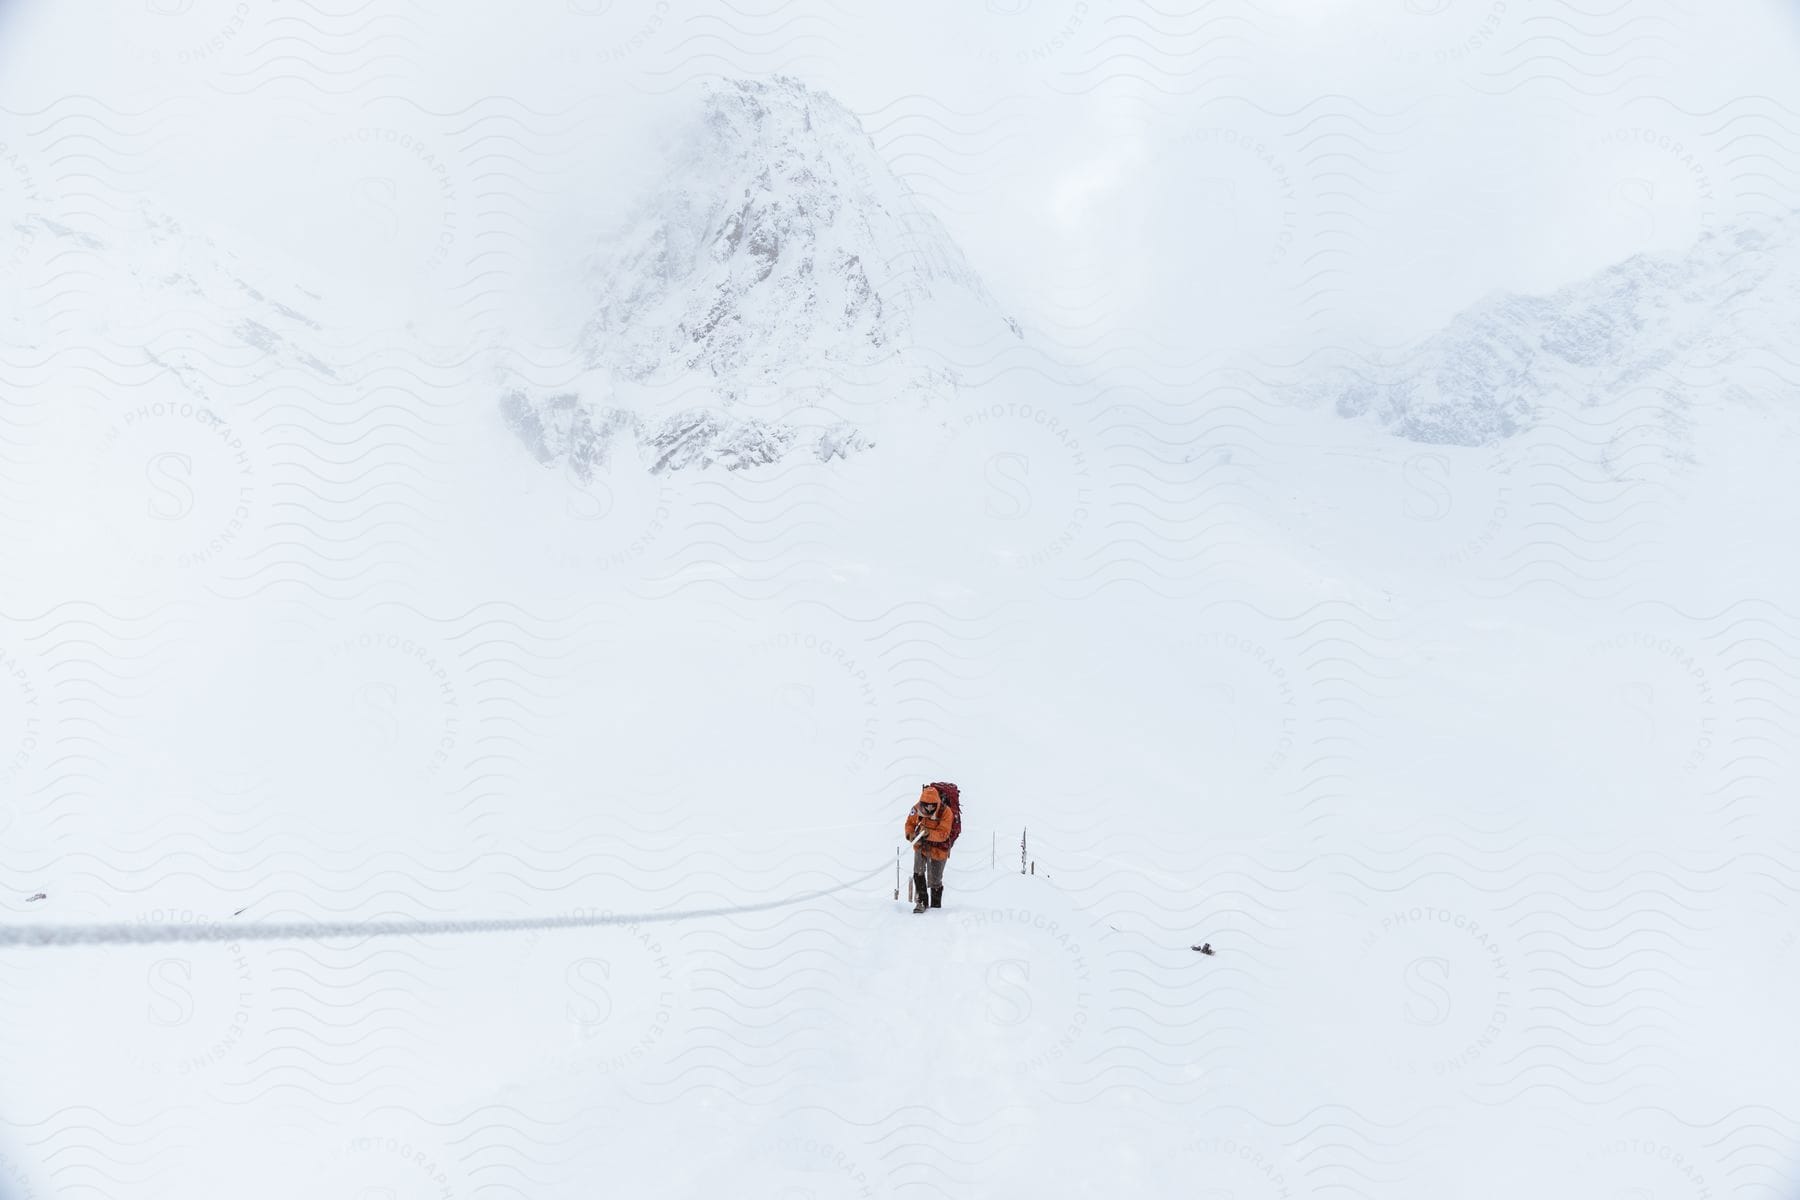 Mountaineer in orange coat and backpack ascending snowy mountain slope using rope